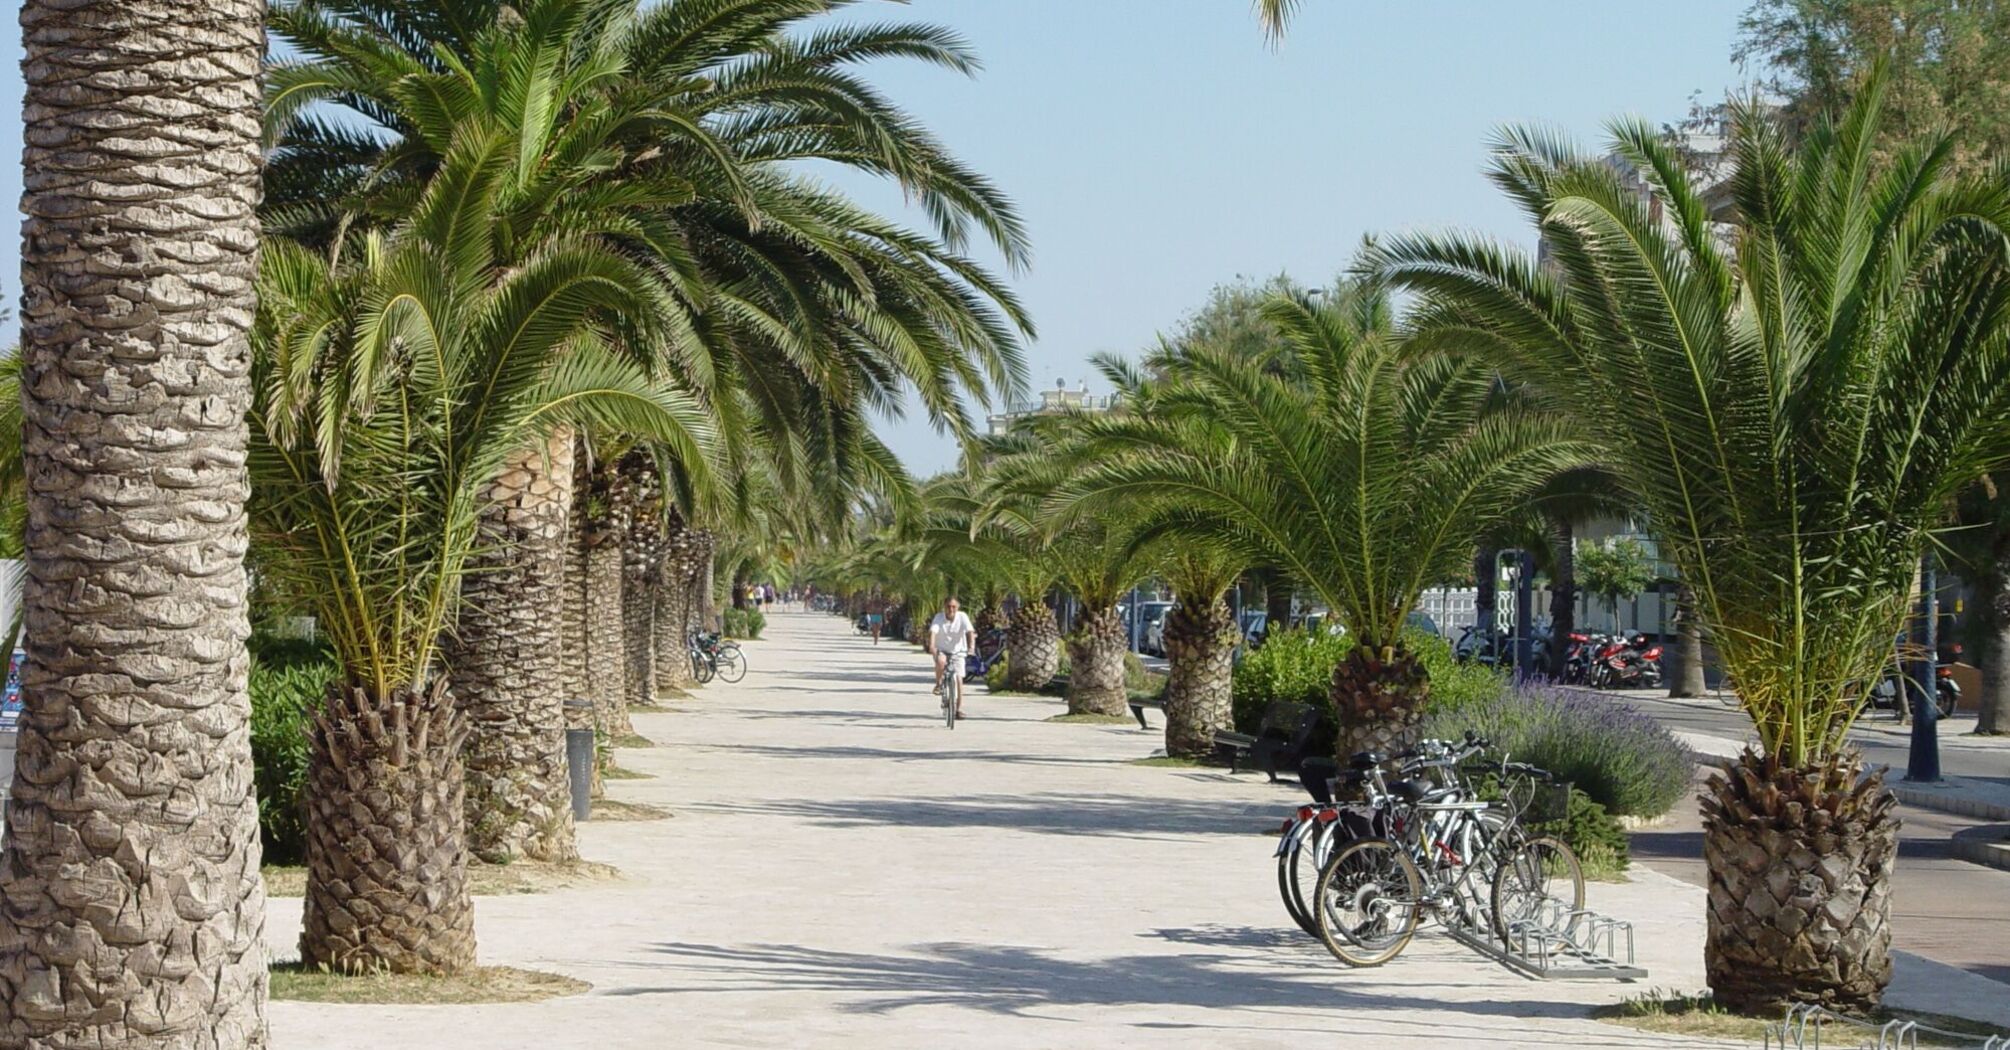 San Benedetto del Tronto: A plan for visiting this Italian commune